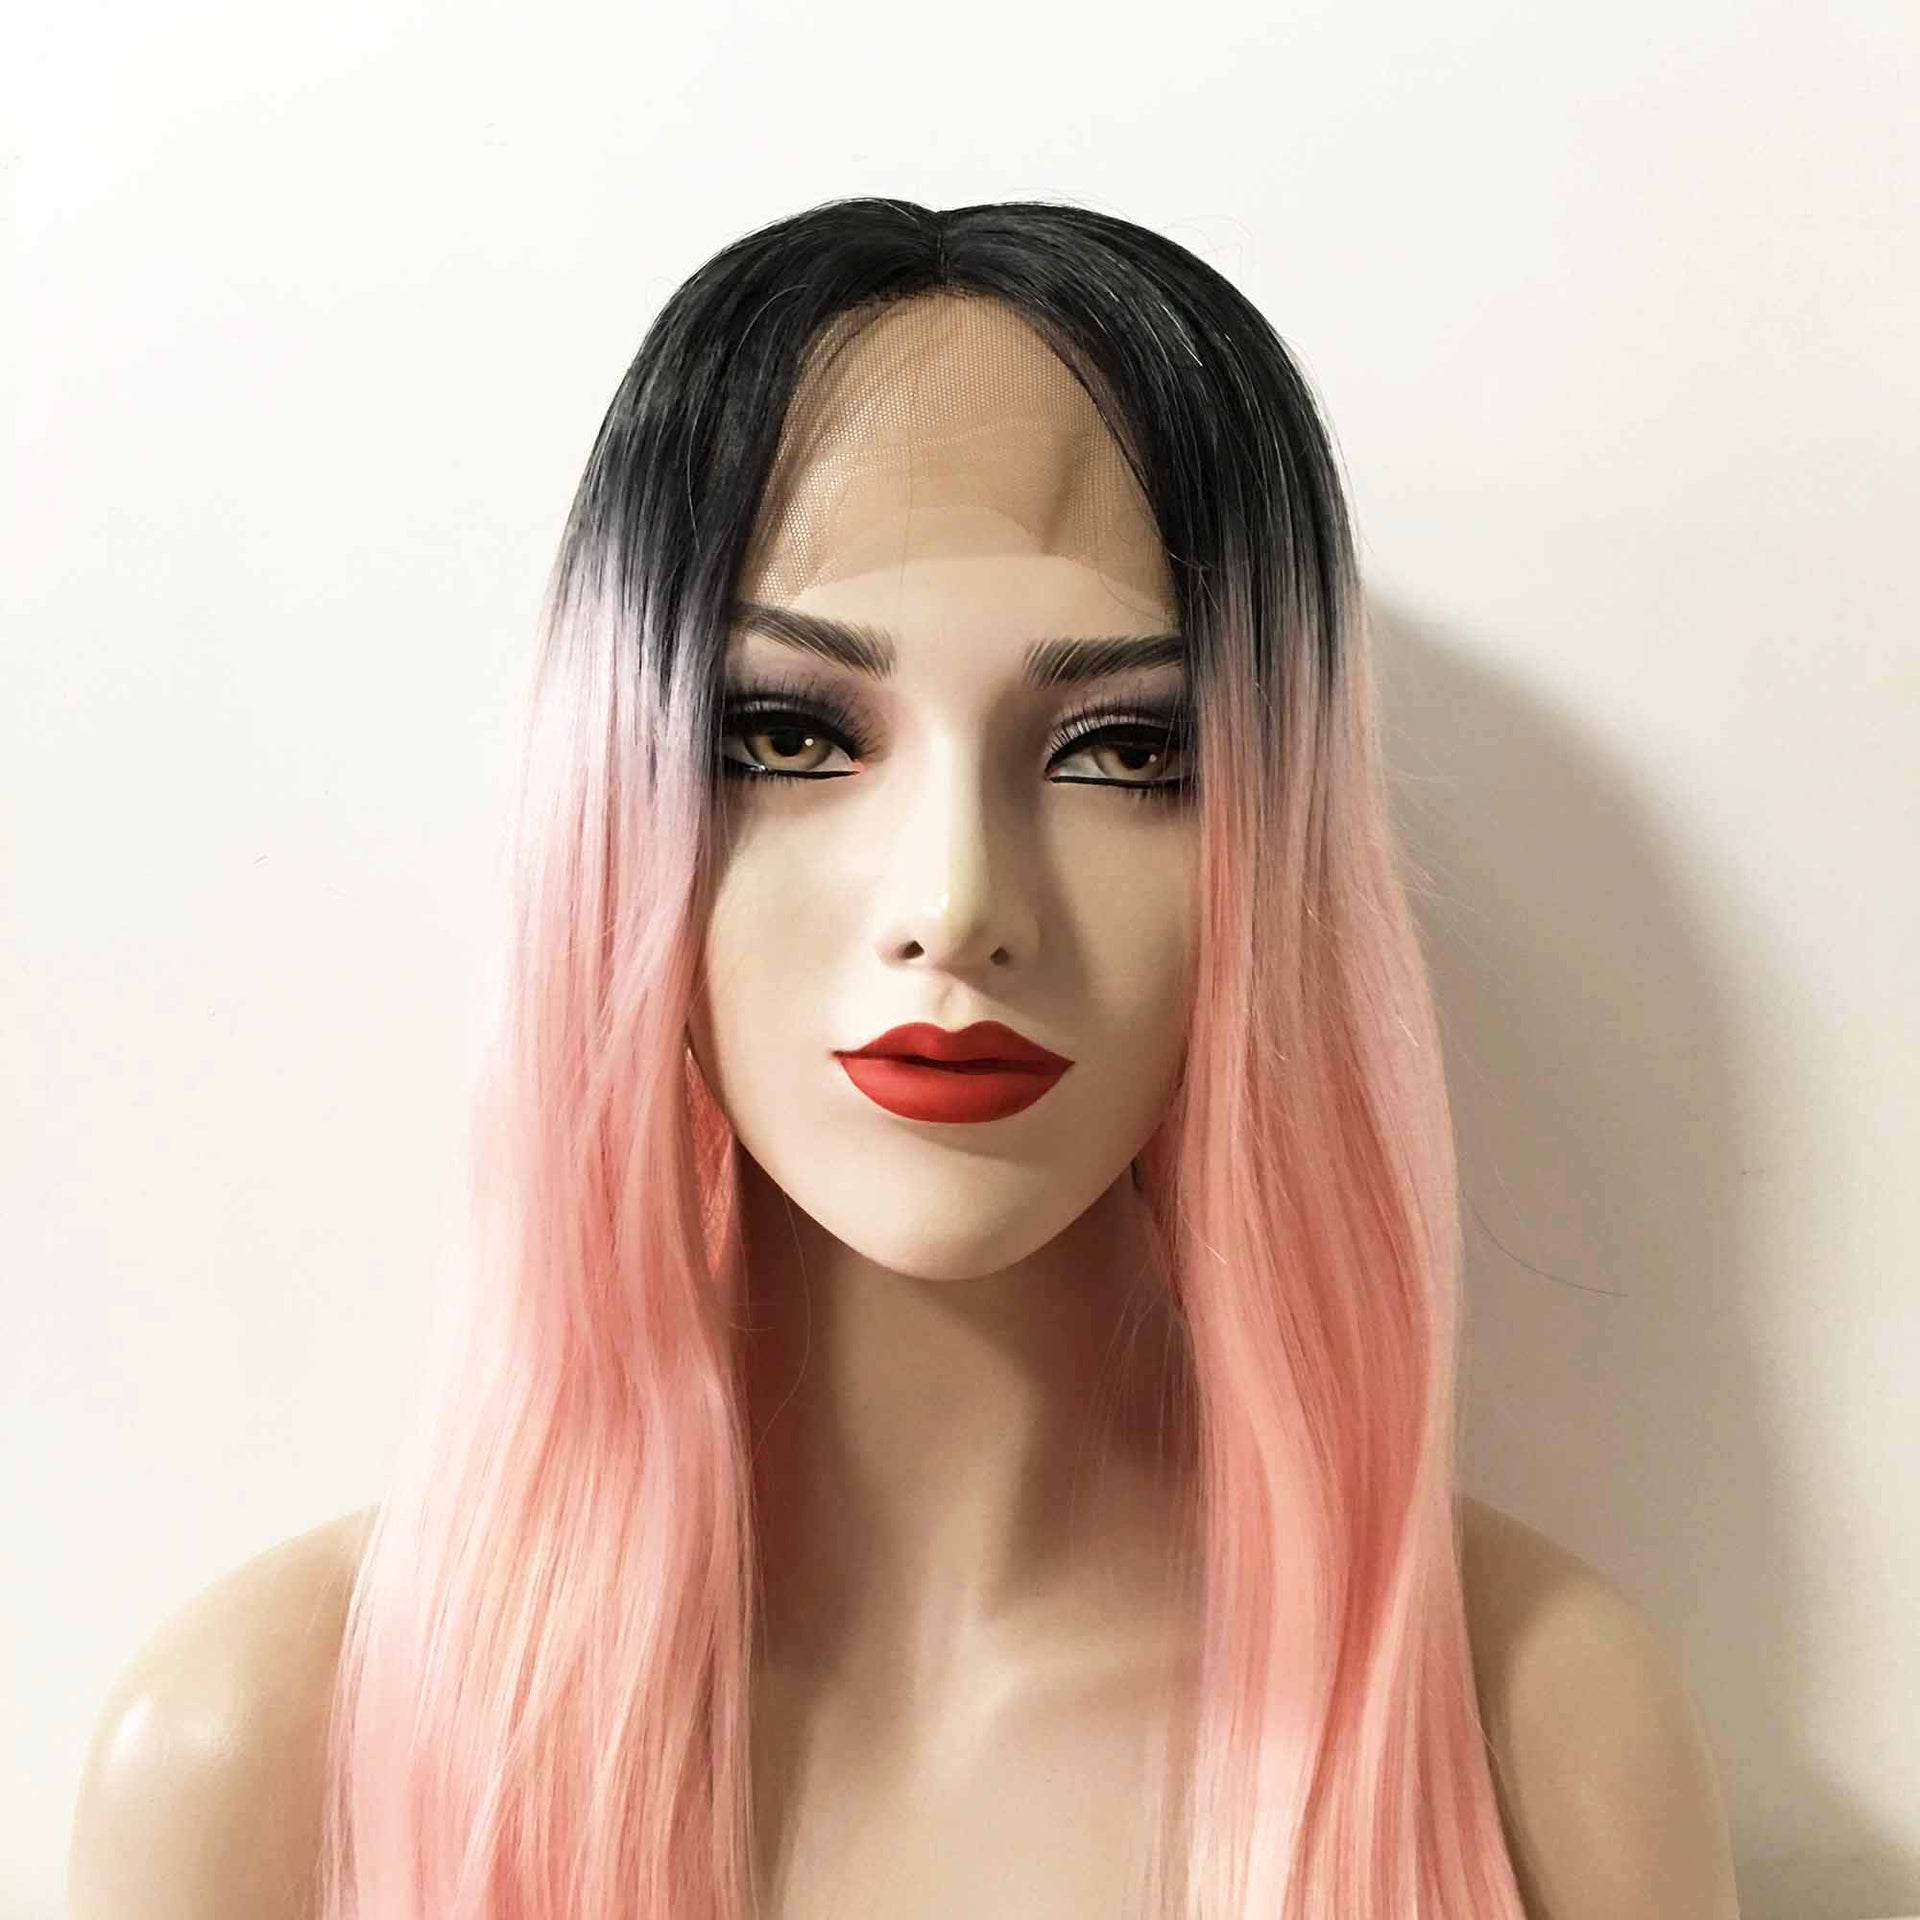 nevermindyrhead Women Ombre Pink Lace Front Dark Root Long Straight Middle Part Wig